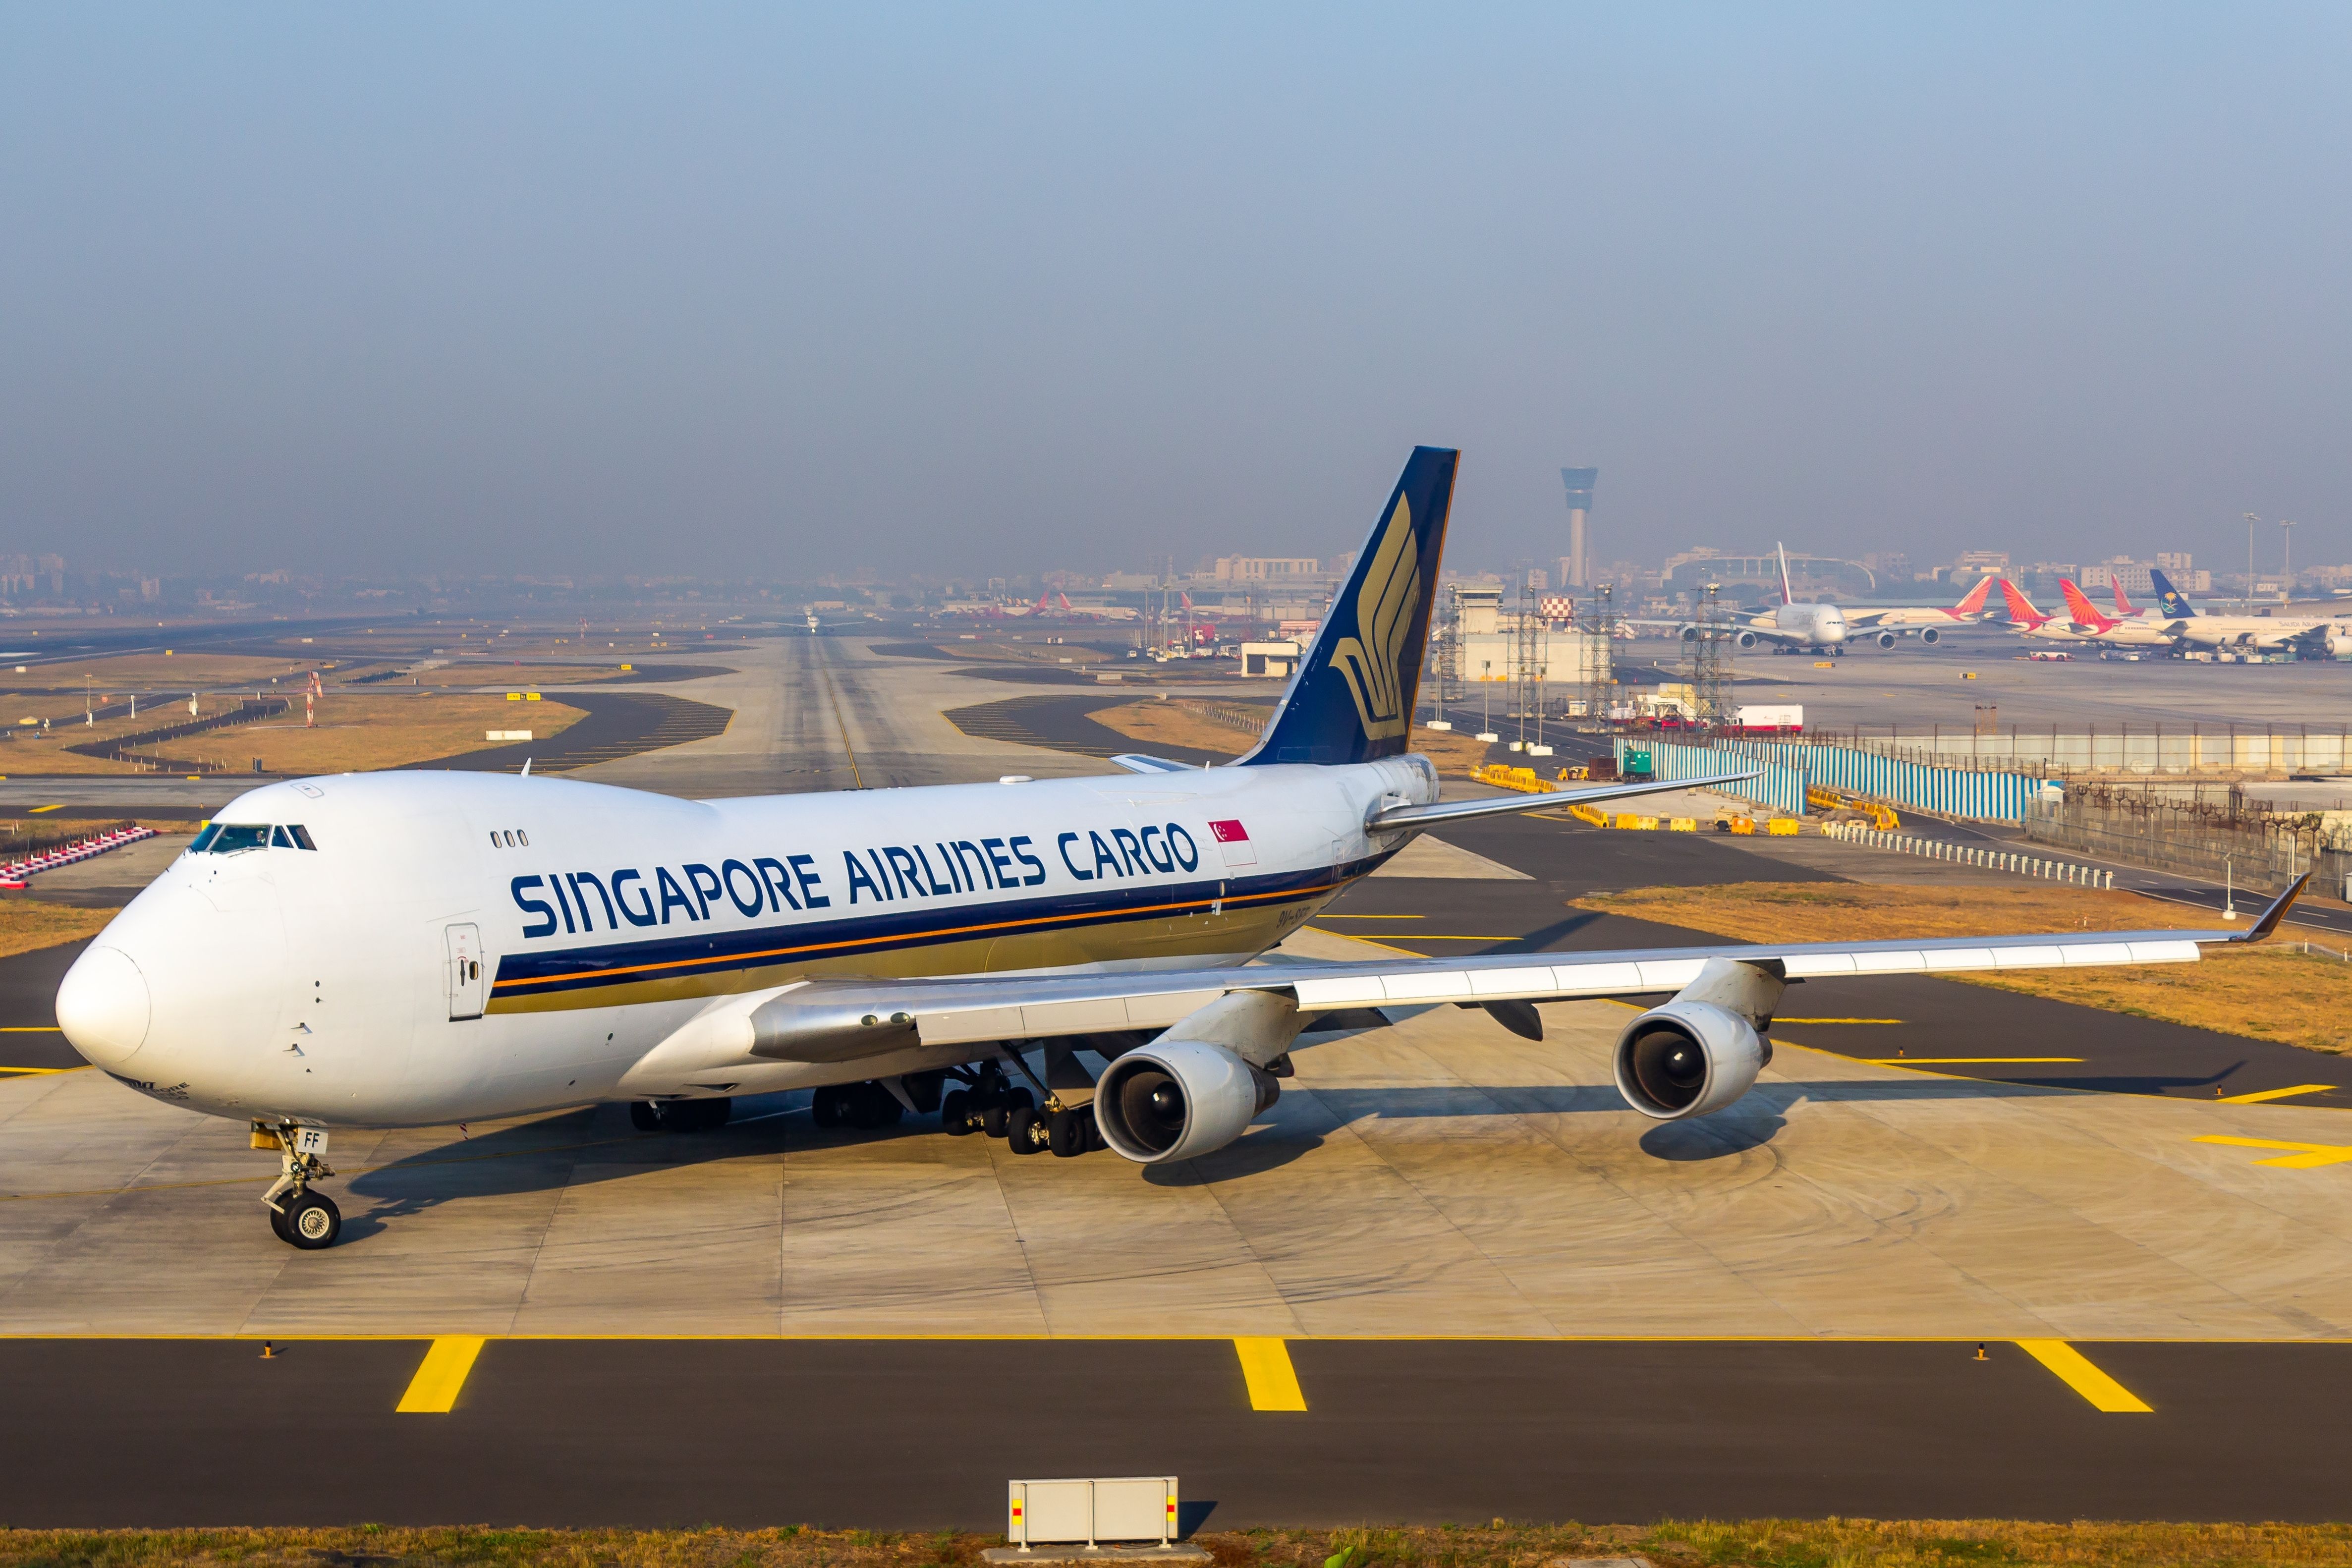 Singapore Airlines Cargo Boeing 747-400F Taxiing In Mumbai